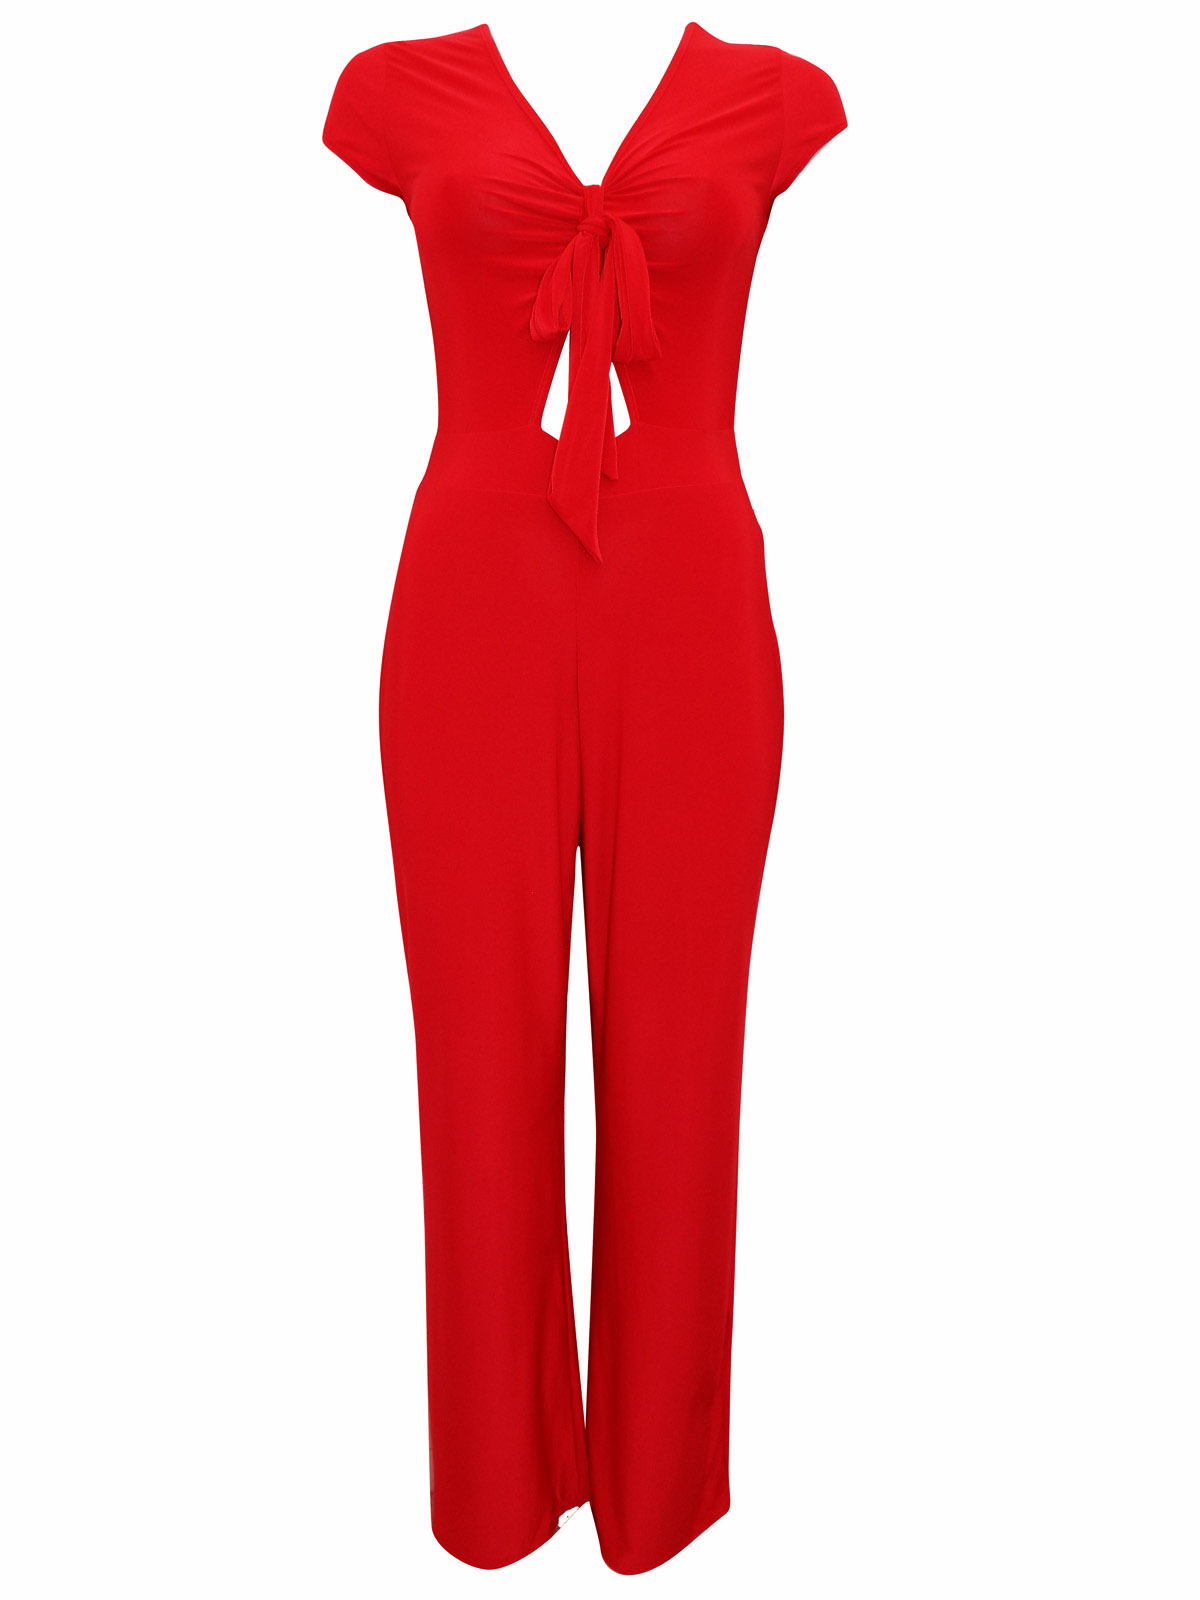 BOOHOO - - B00H00 RED Keyhole Front Jersey Jumpsuit - Size 8 to 16